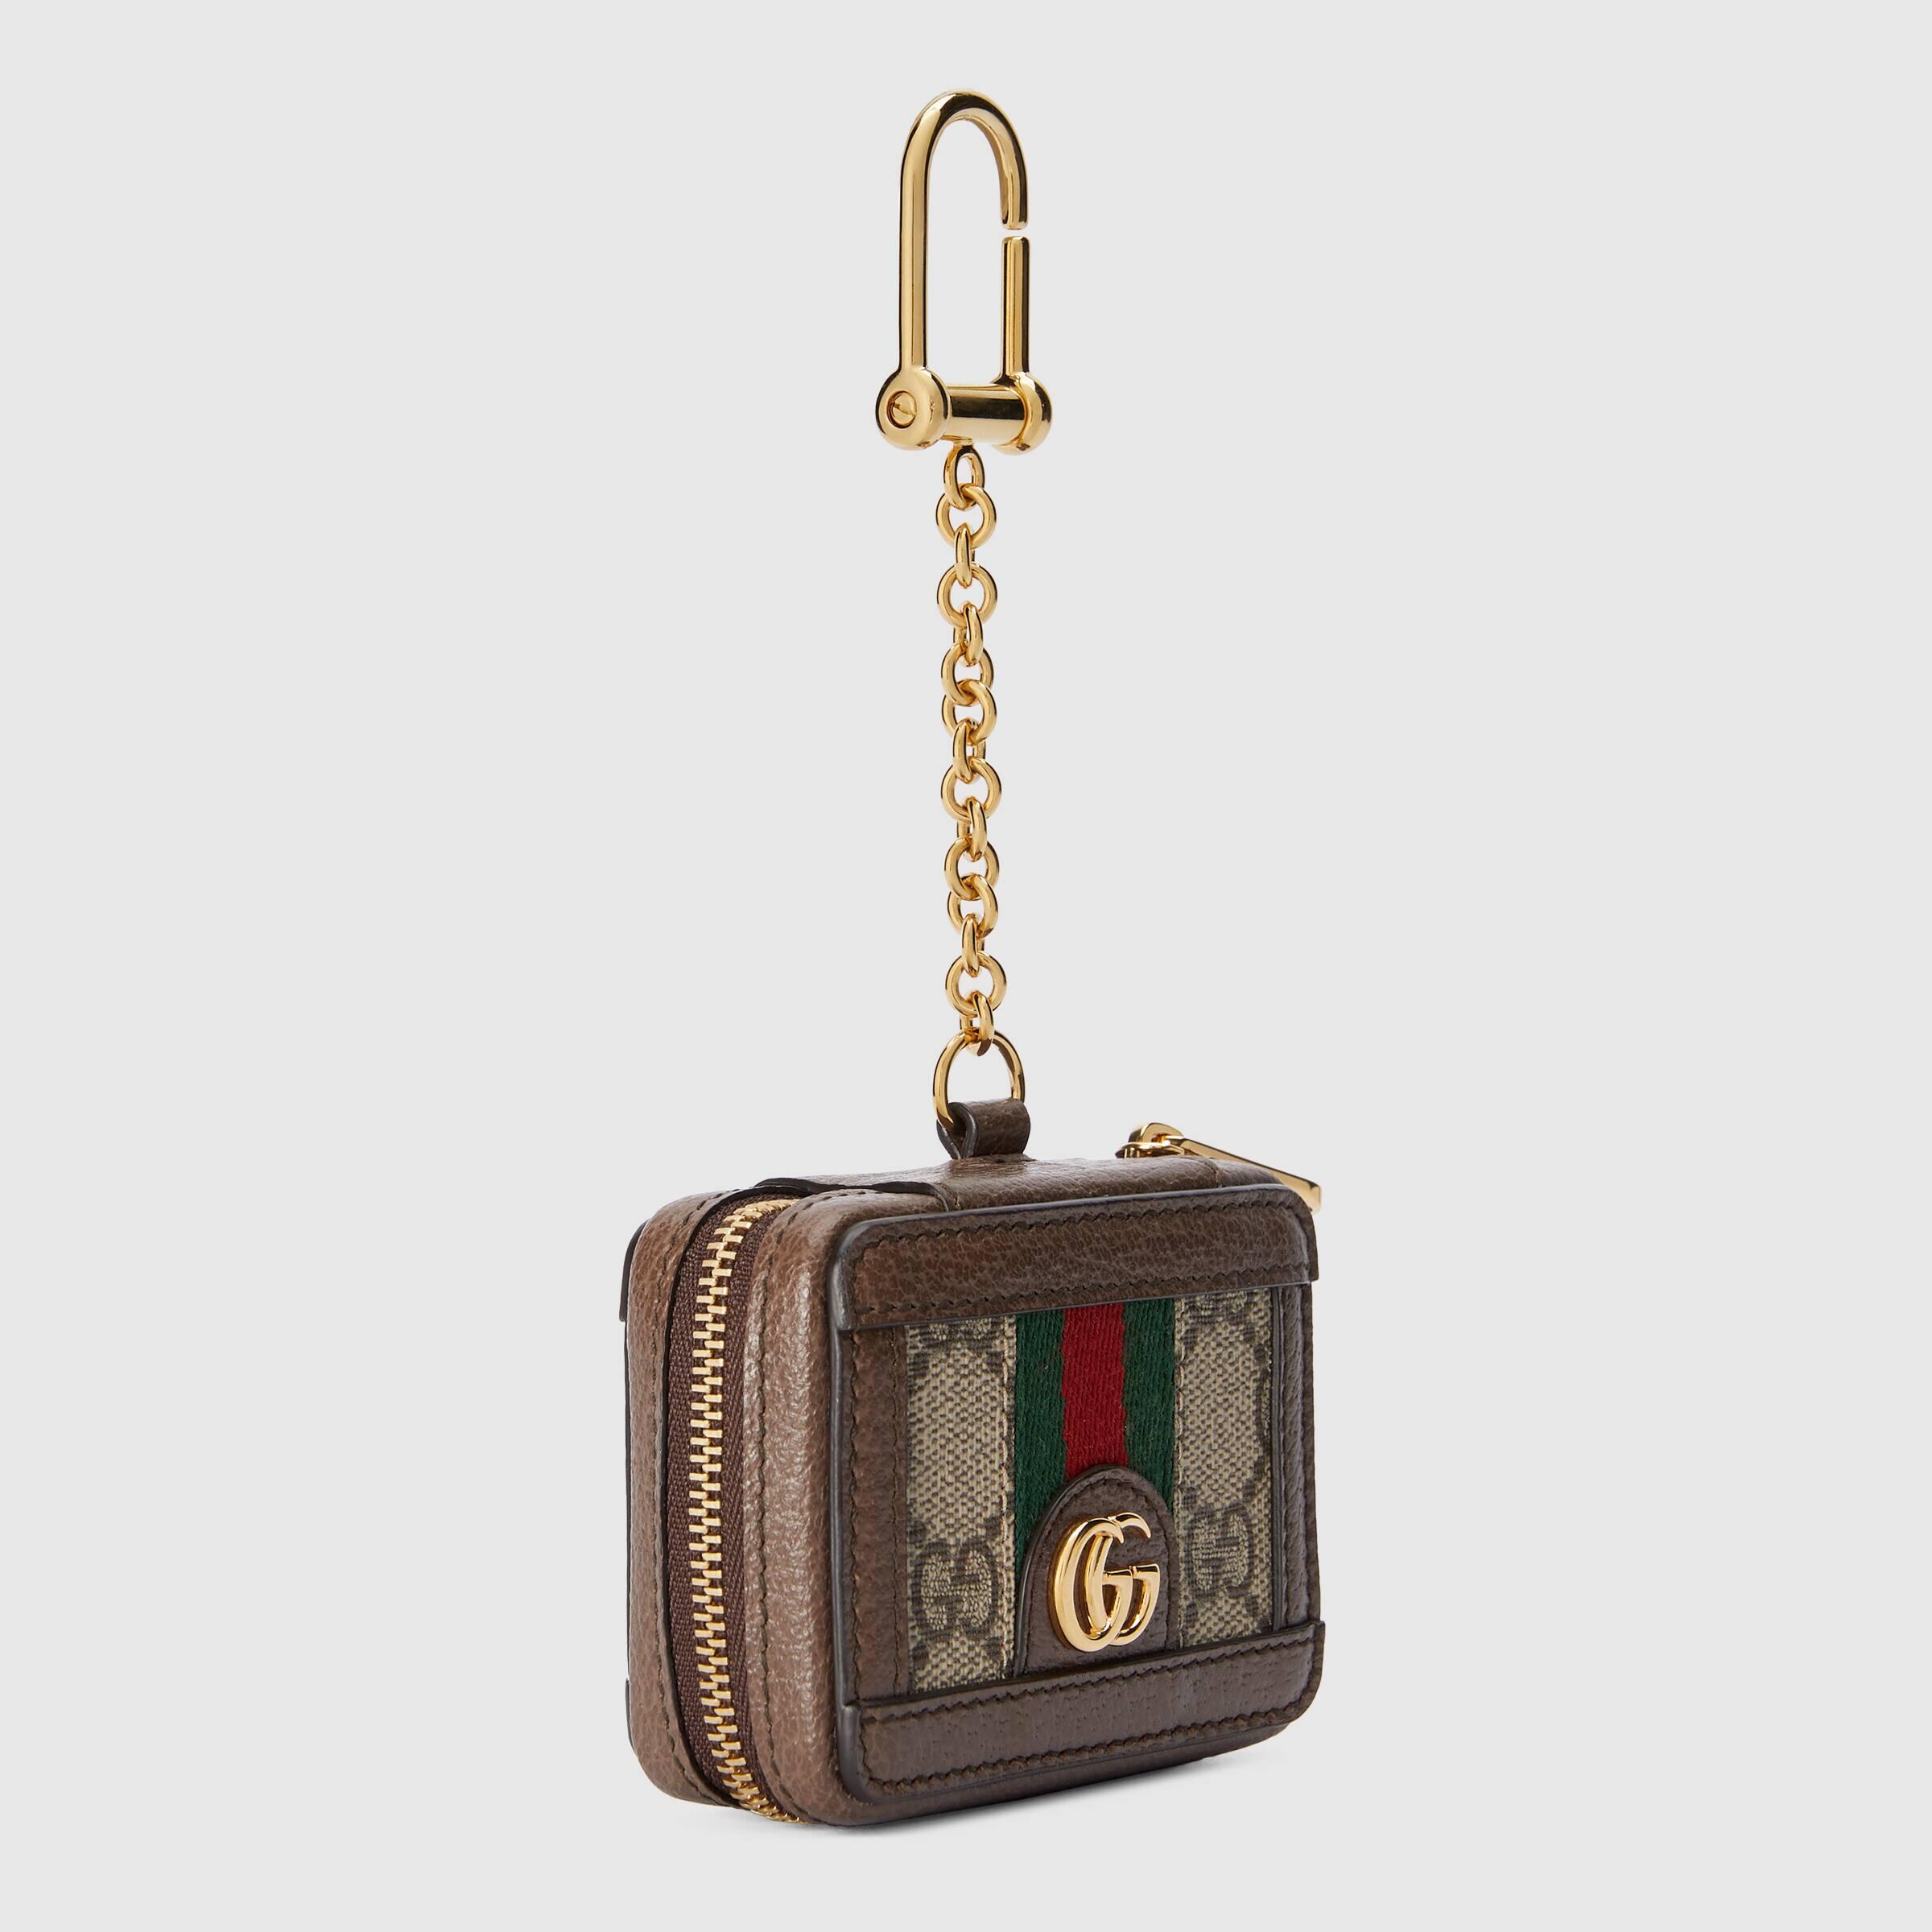 Gucci Ophidia Keychain Case For Airpods in Natural | Lyst